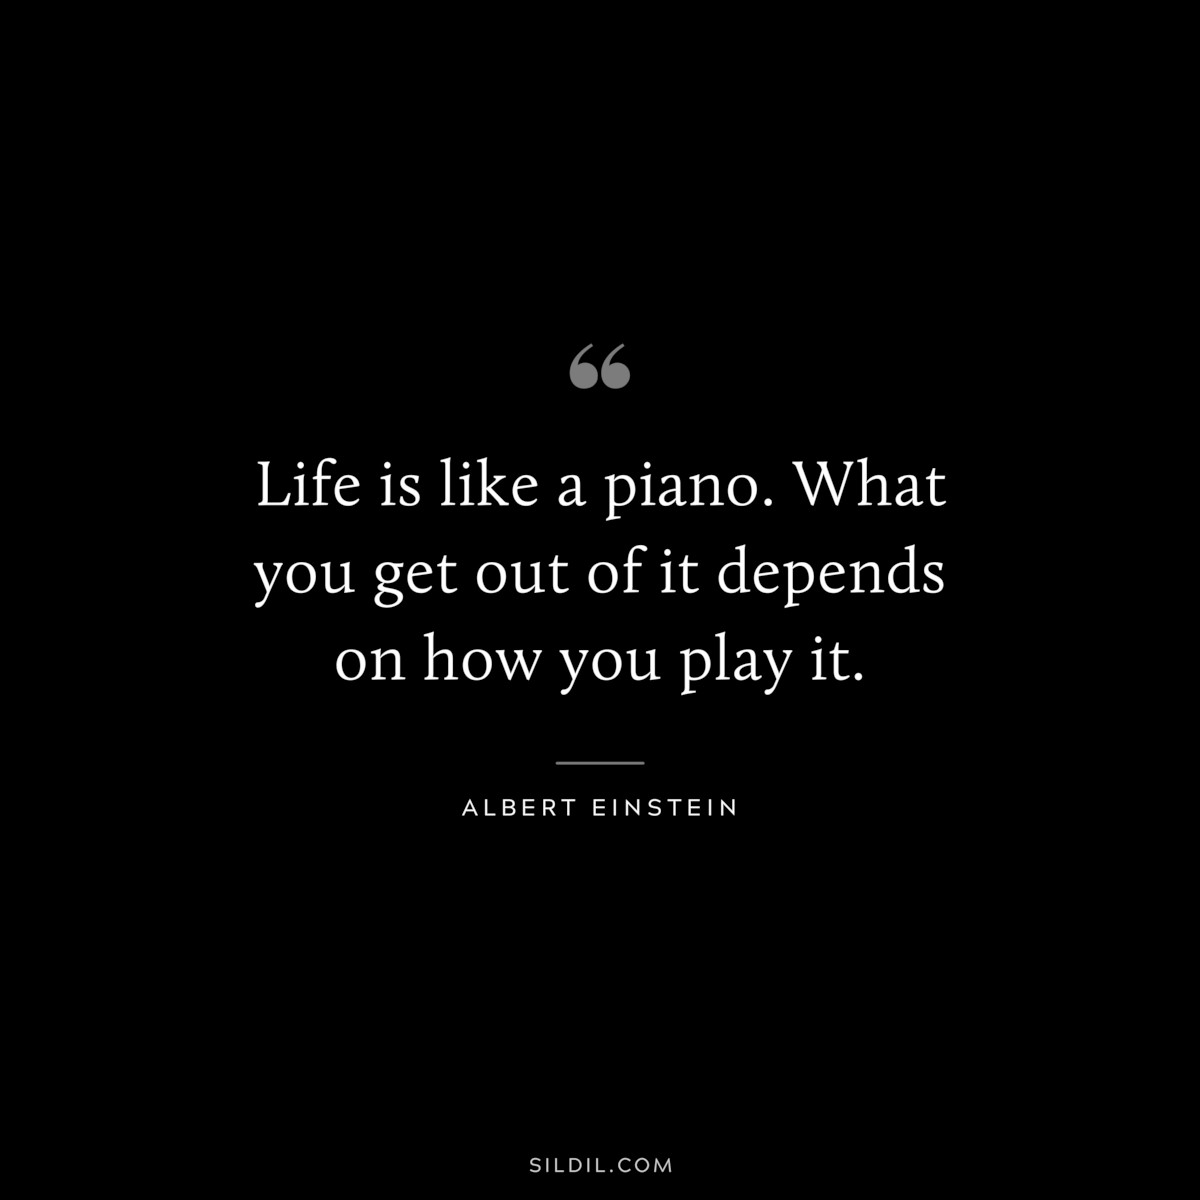 Life is like a piano. What you get out of it depends on how you play it. ― Albert Einstein